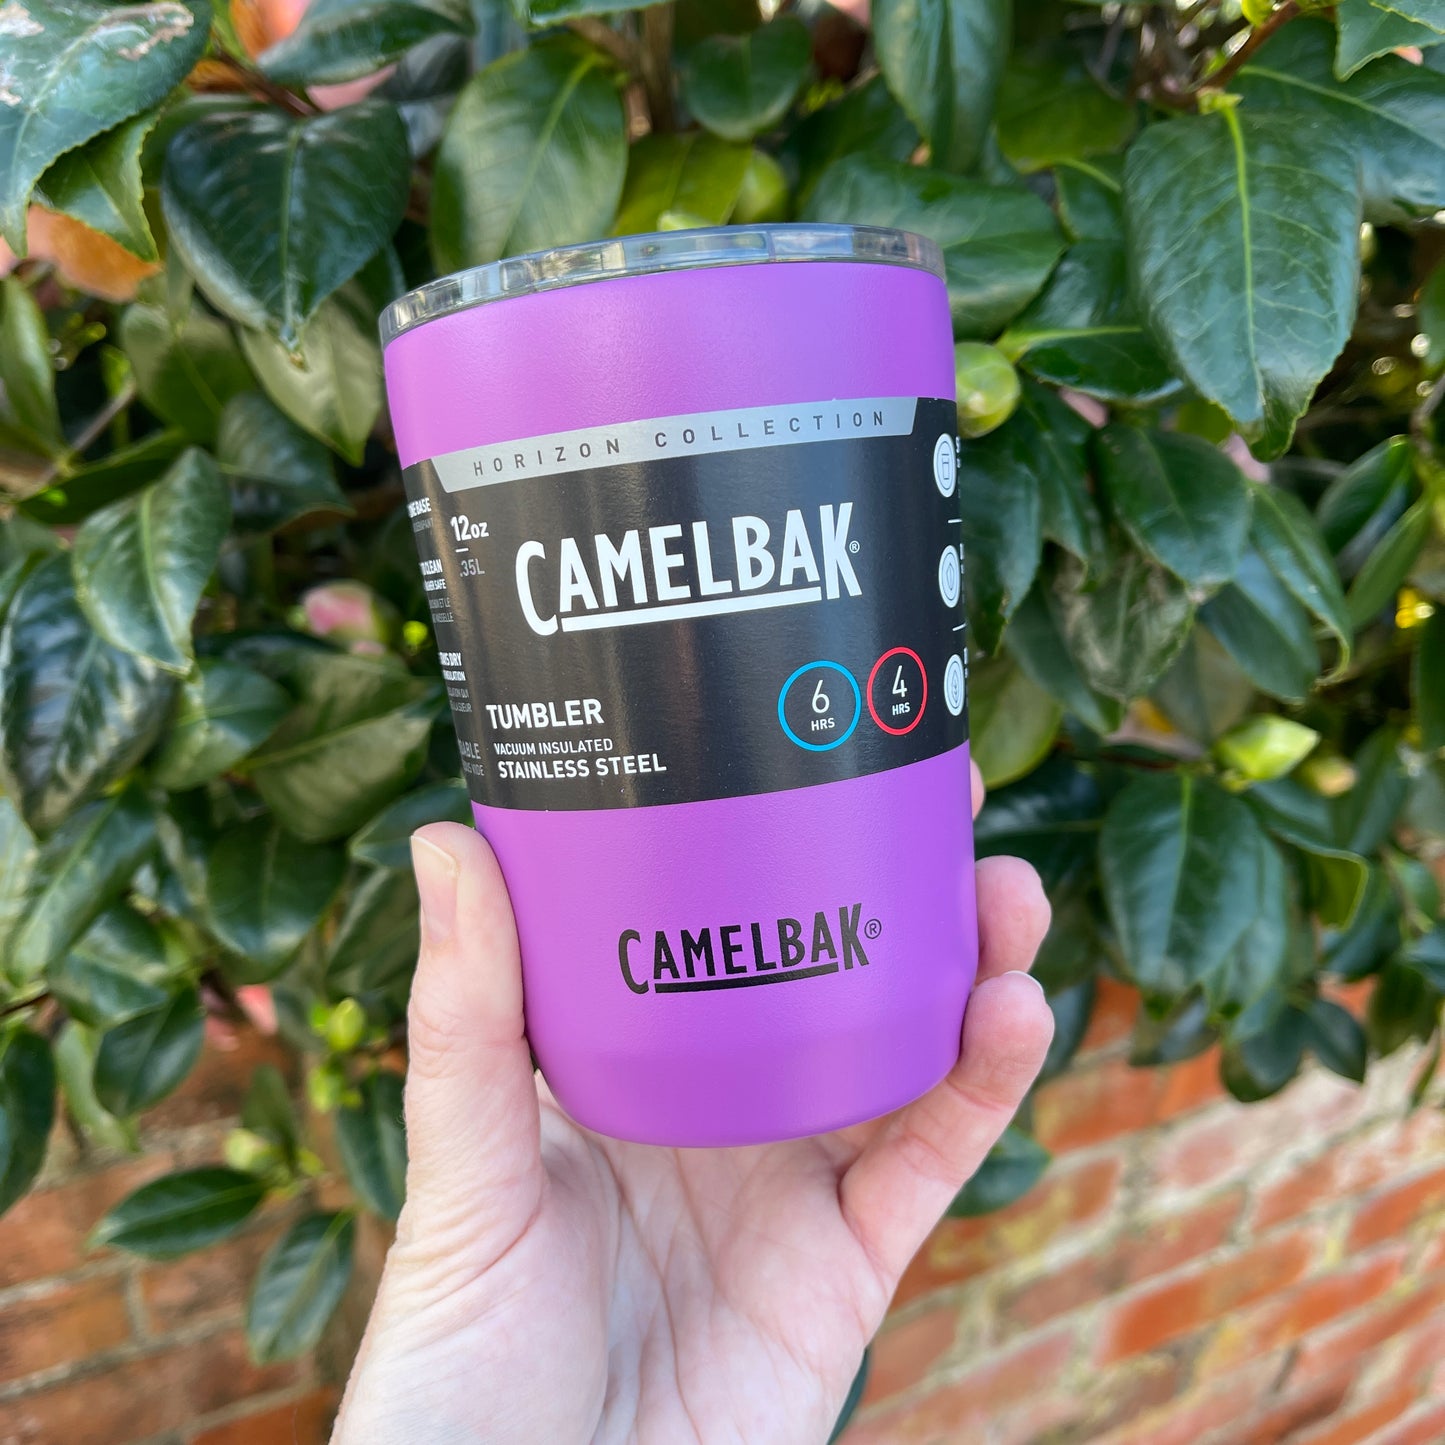 Stainless steel coffee tumbler from Camelbak in a magenta colour.